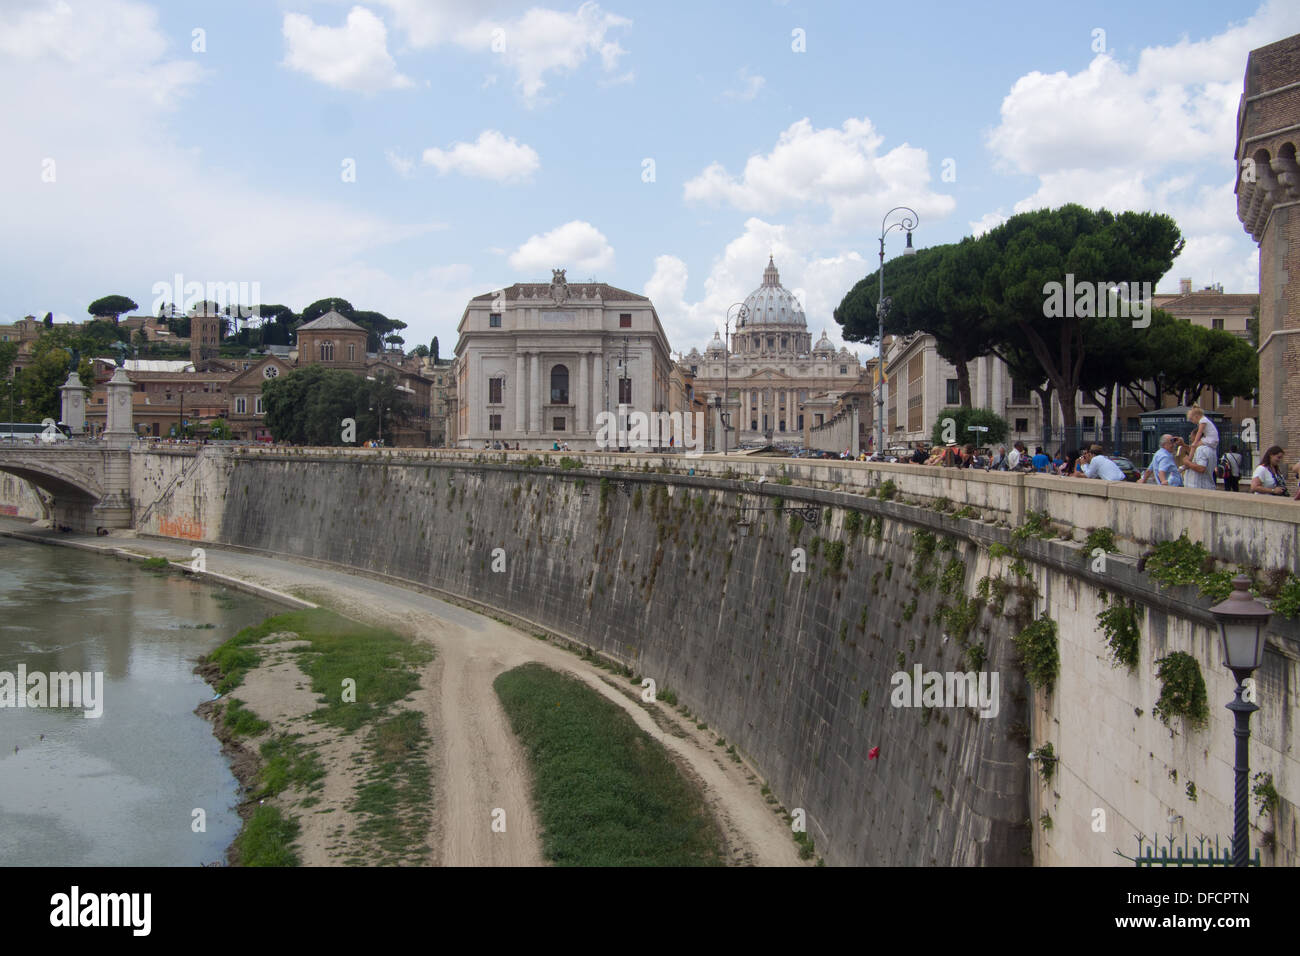 St Peters Basilica as viewed from the banks of the Tiber river, Rome, Lazio region, Italy Stock Photo